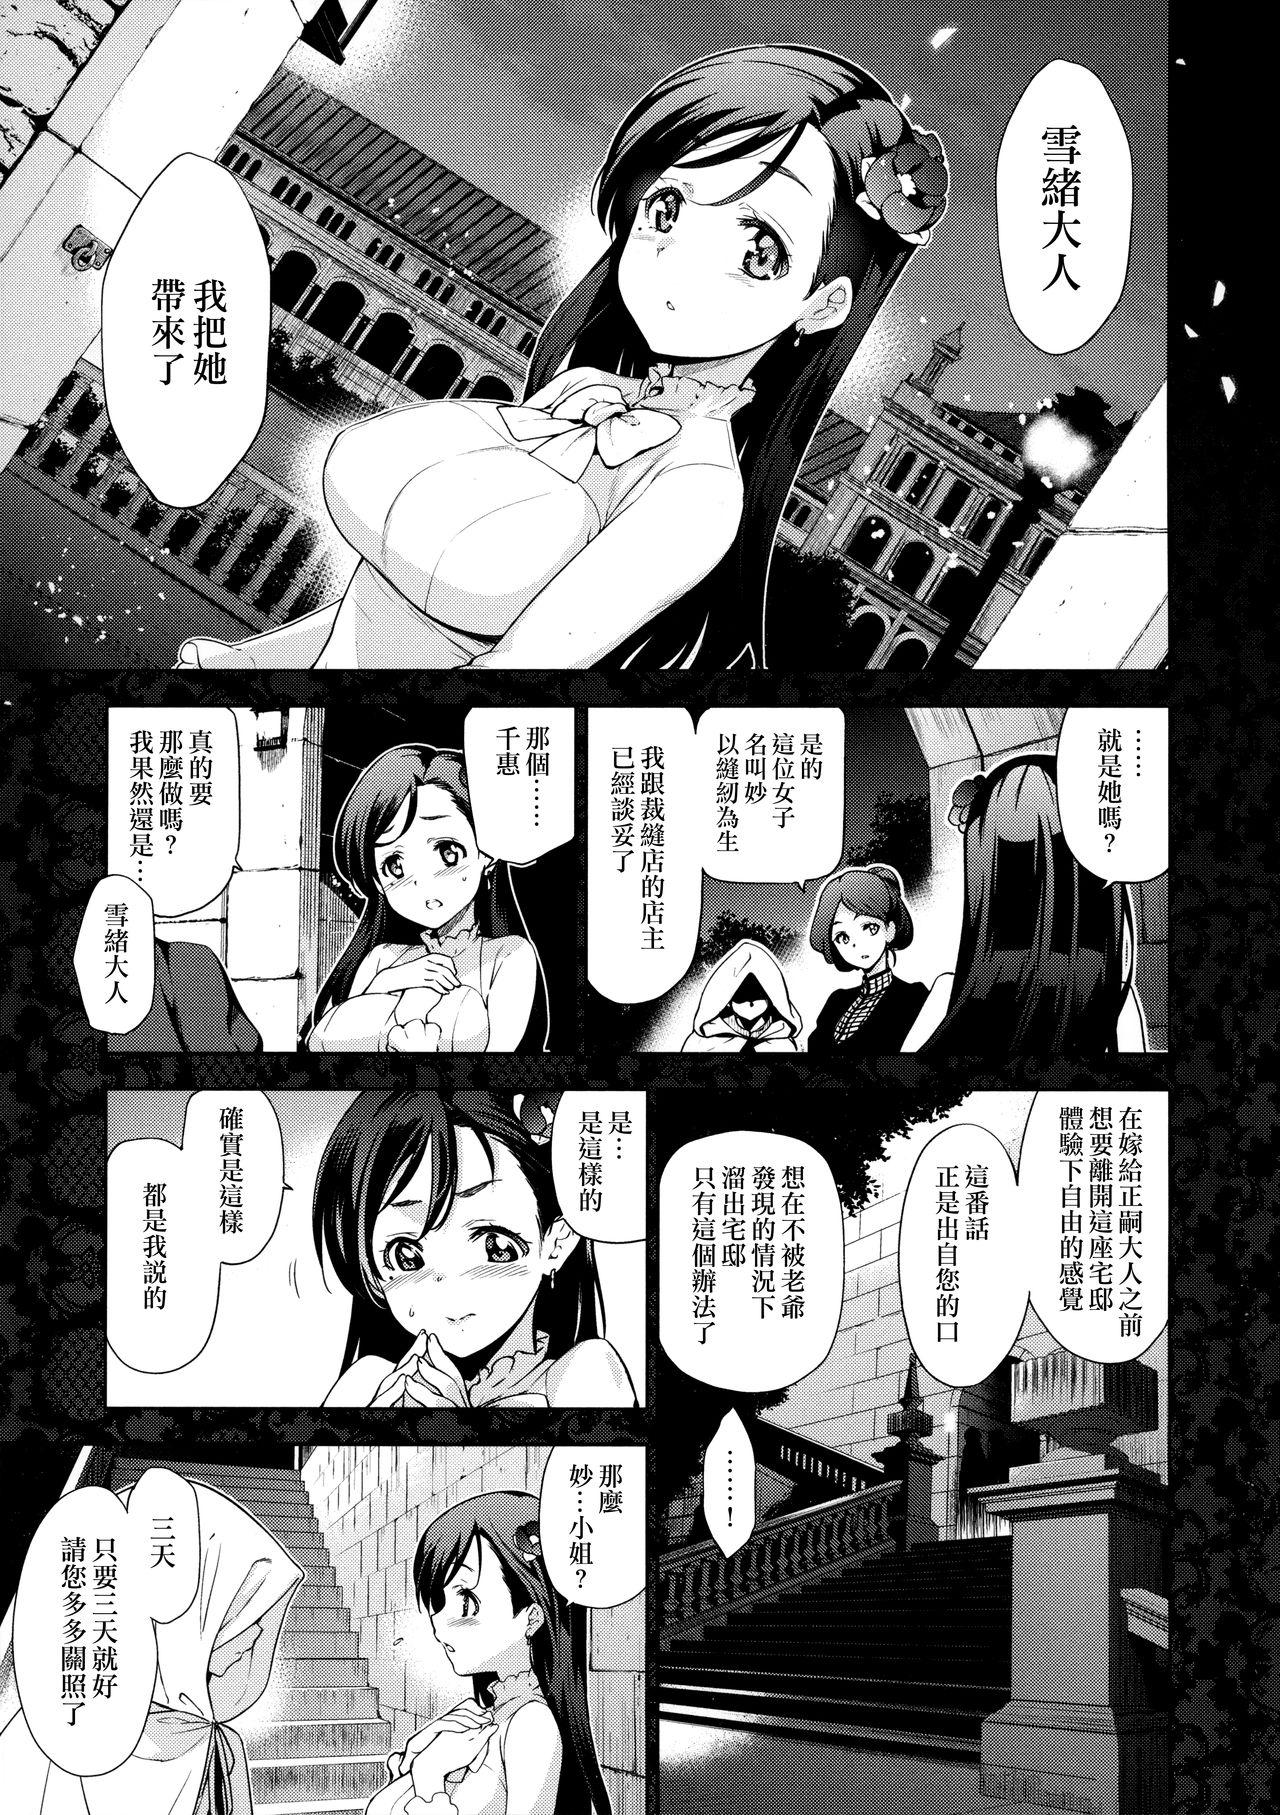 Young Old [Inue Shinsuke] Hime-sama Otoshi - Fallen Princesses Ch. 1-6 [Chinese] [無邪気漢化組] Super - Page 3